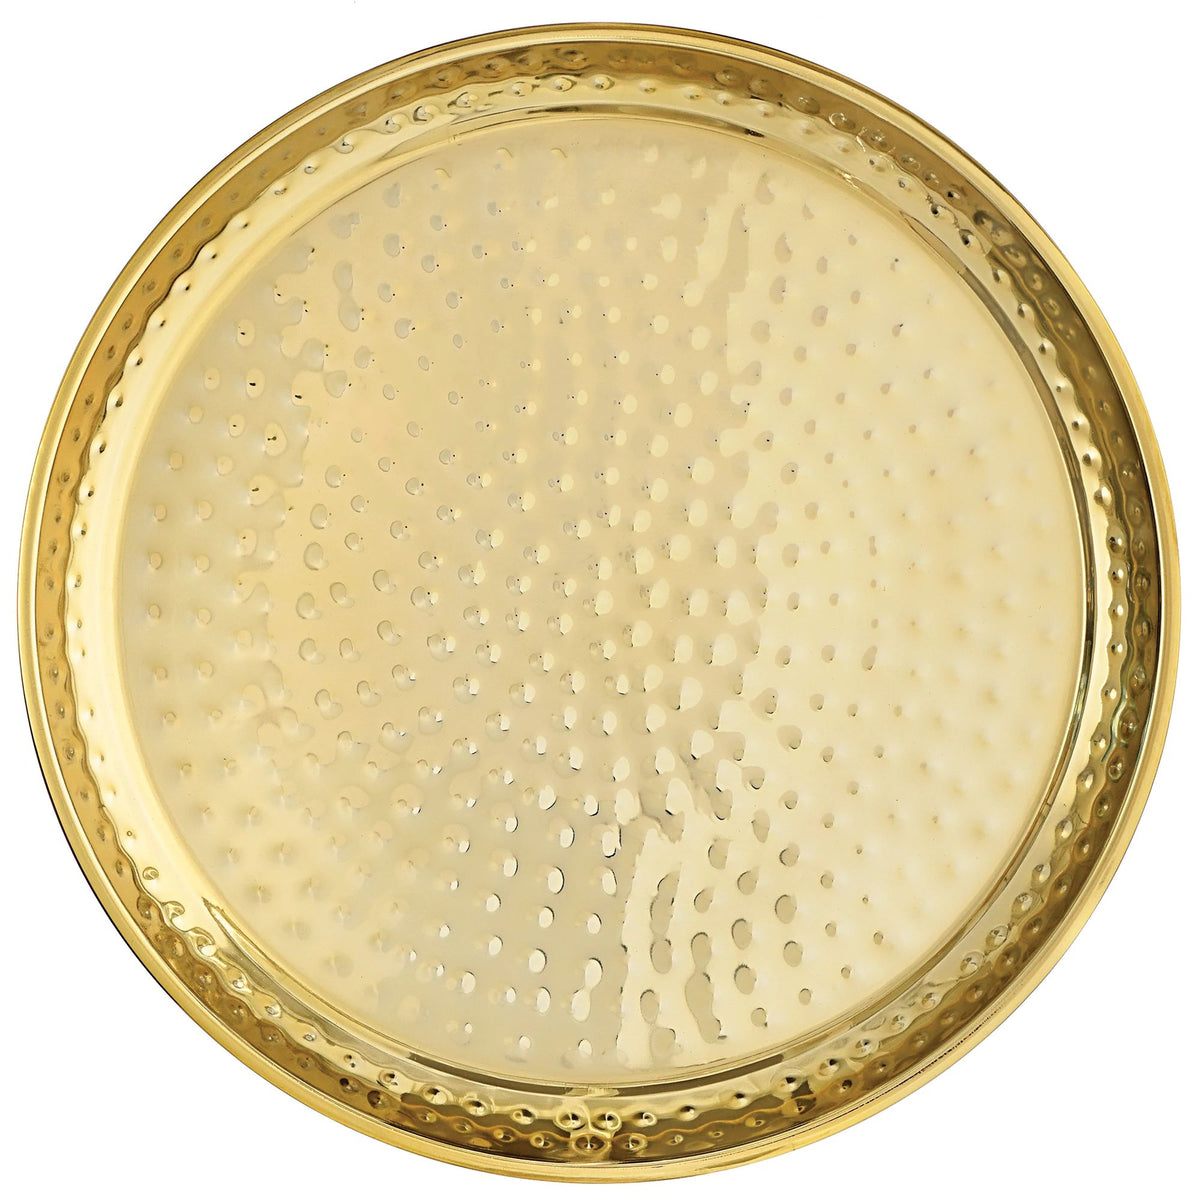 Hammered Stainless Steel Gold 15 1/2" Tray